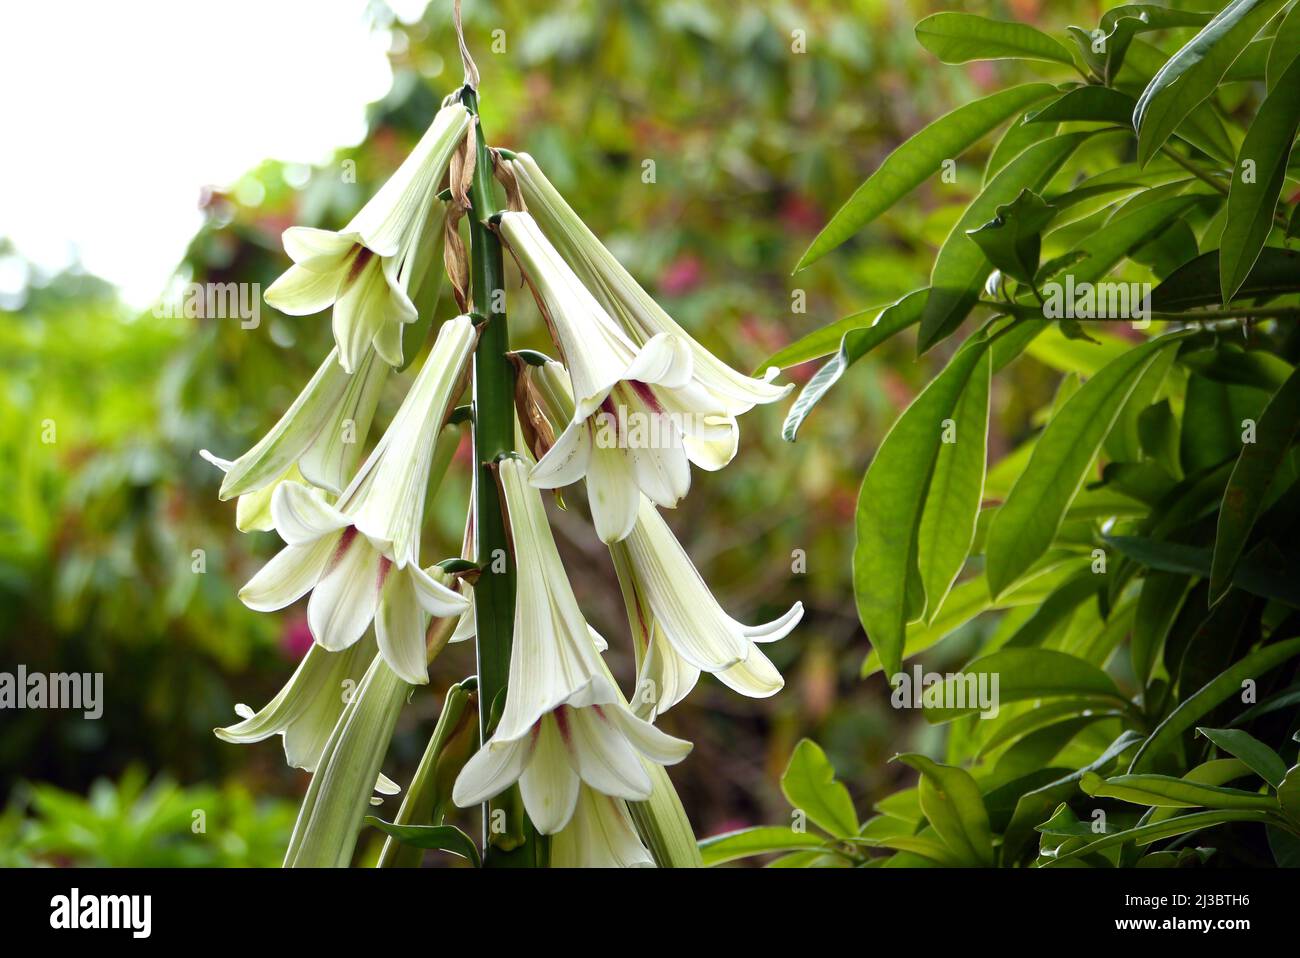 Tall White Giant Himalayan lily (Cardiocrinum giganteum) Flowers grown at Holker Hall & Gardens, Lake District, Cumbria, England, UK. Stock Photo